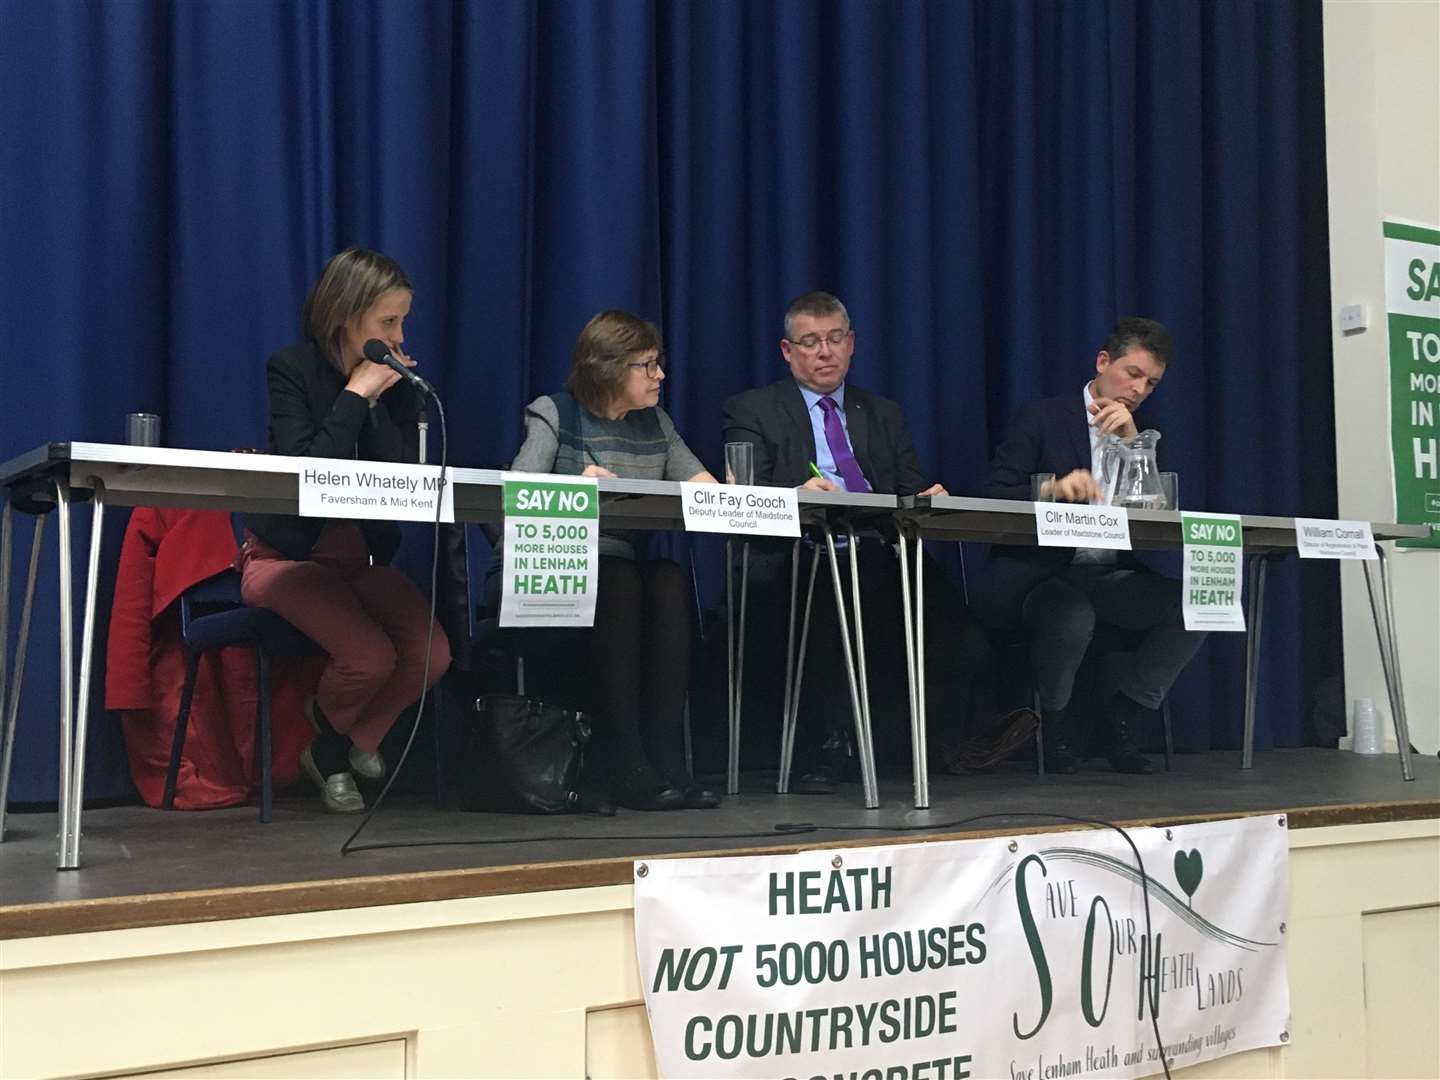 Helen Whately, Fay Gooch, Martin Cox and William Cornall discuss the Lenham Heath proposals